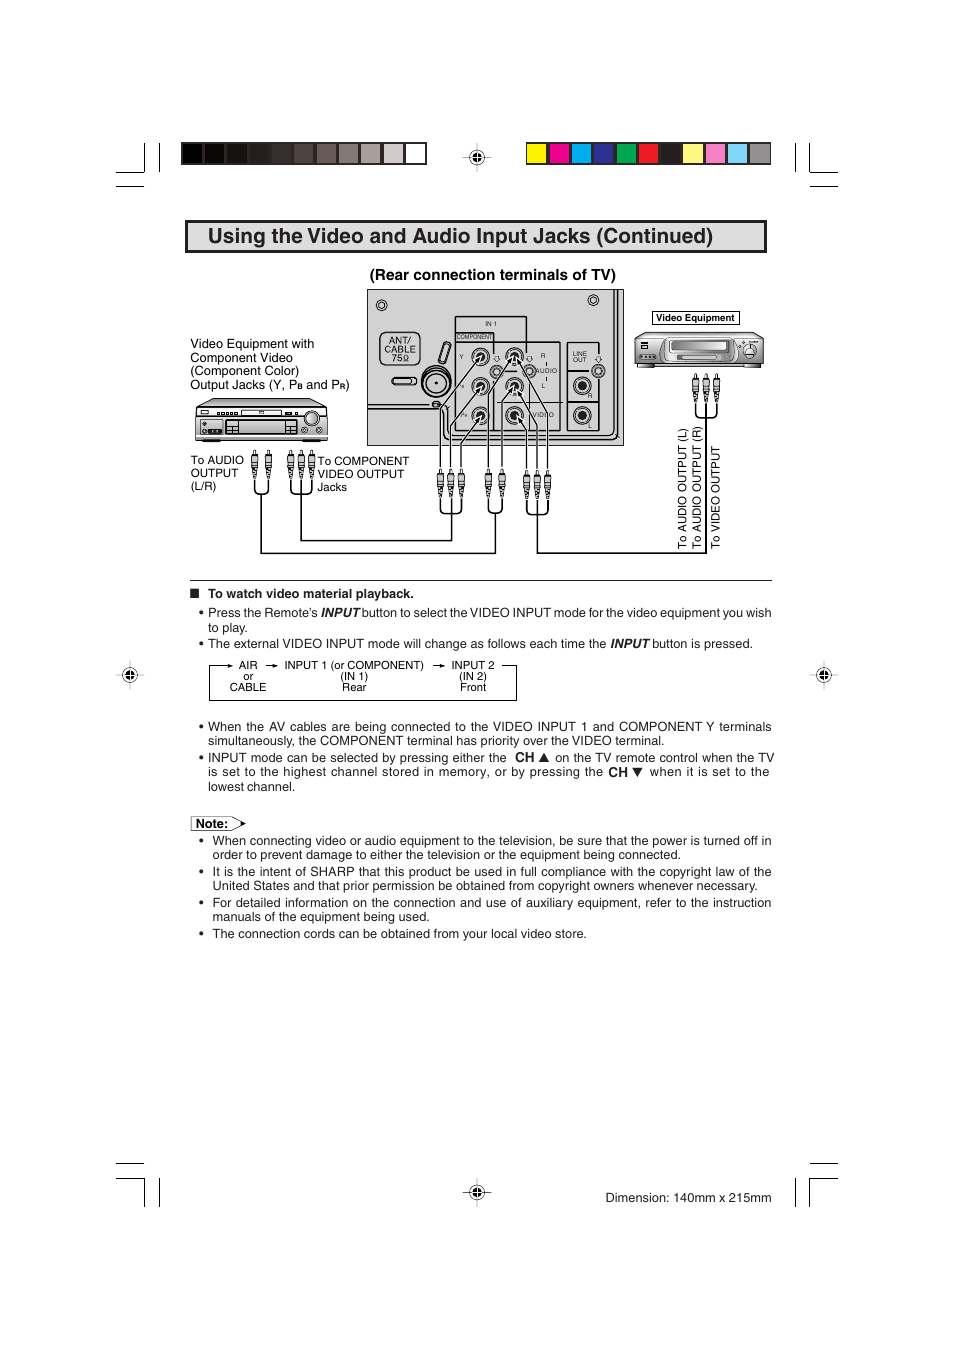 Using the video and audio input jacks (continued), Rear connection terminals of tv) | Sharp 20F540 L User Manual | Page 38 / 59